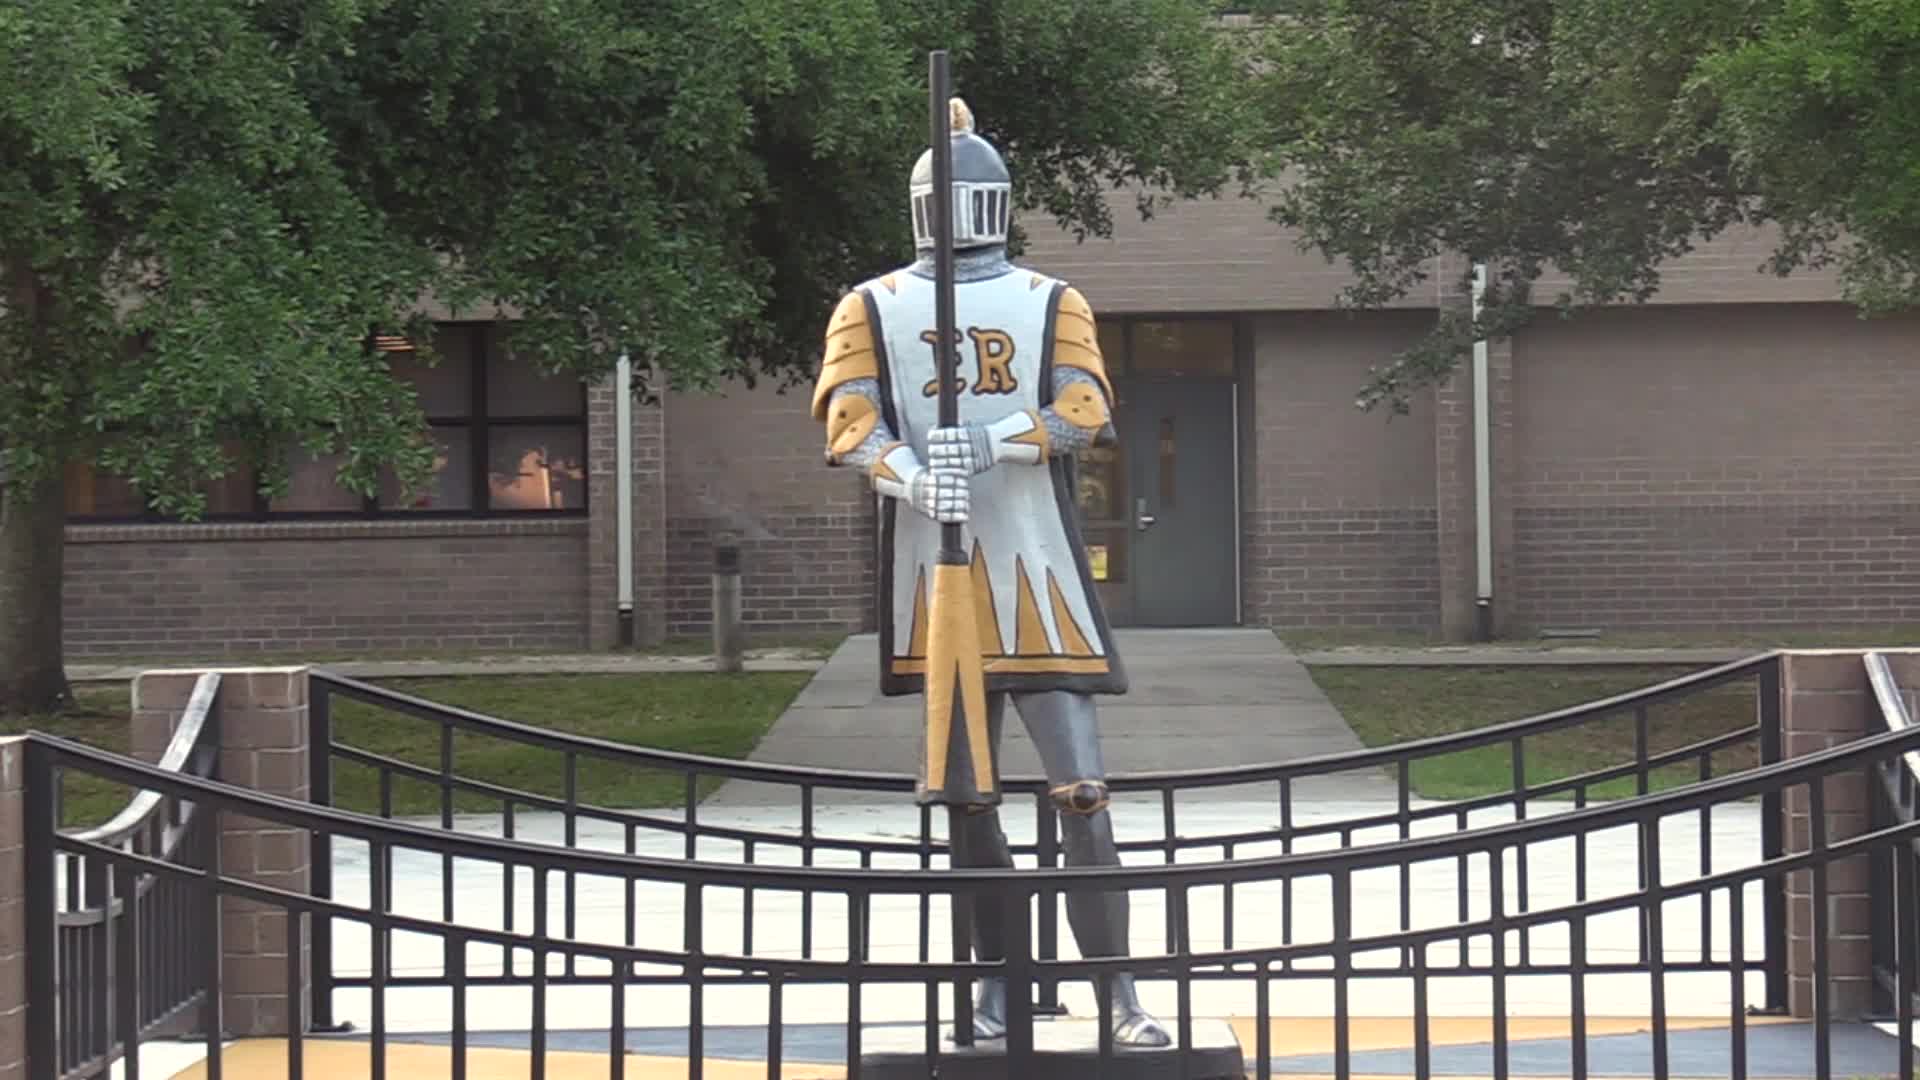 East Ridge High / Home of the 1 Knight Nation